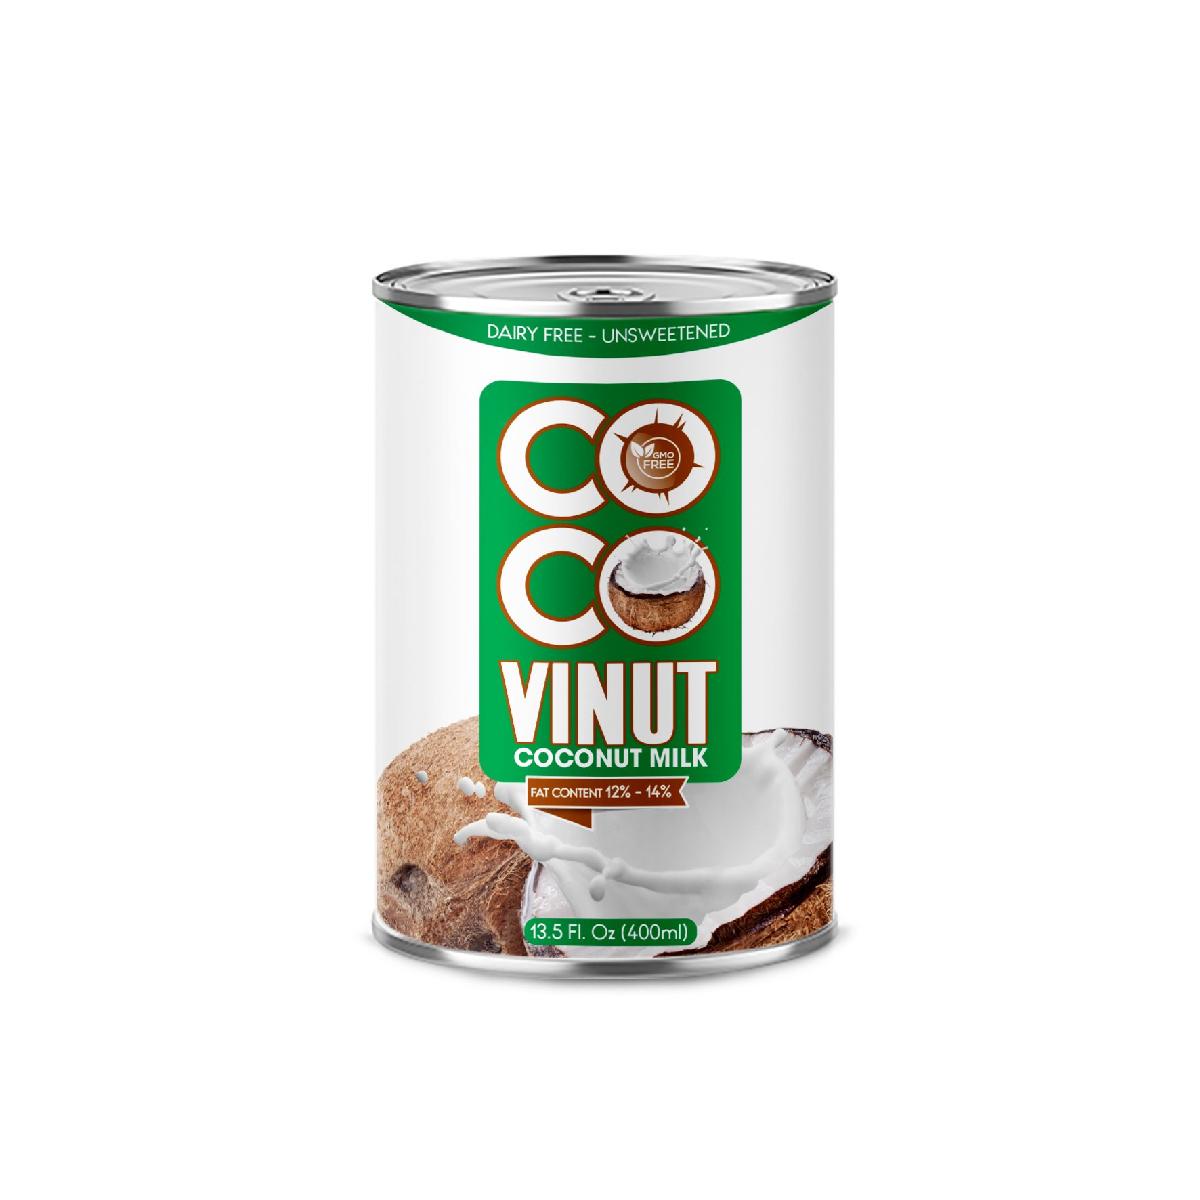 400ml Can (Tinned) Coconut Milk for cooking 12-14% Fat UHT Gluten Free and Vegan Product with Halal